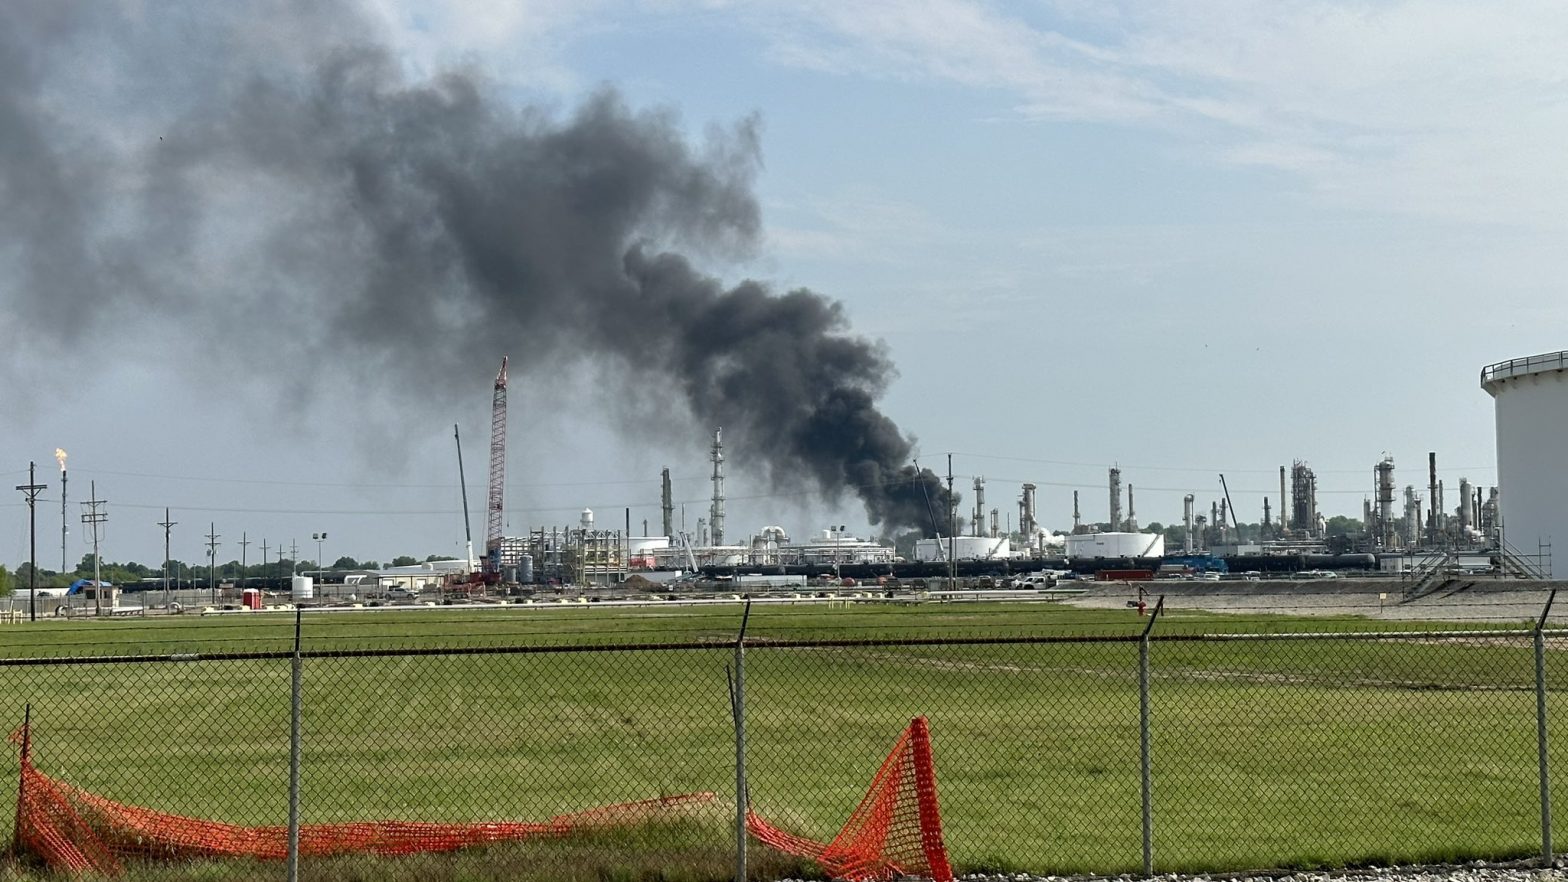 Wynnewood Refinery explosion: 2 people injured in fire, flown to hospital in Oklahoma